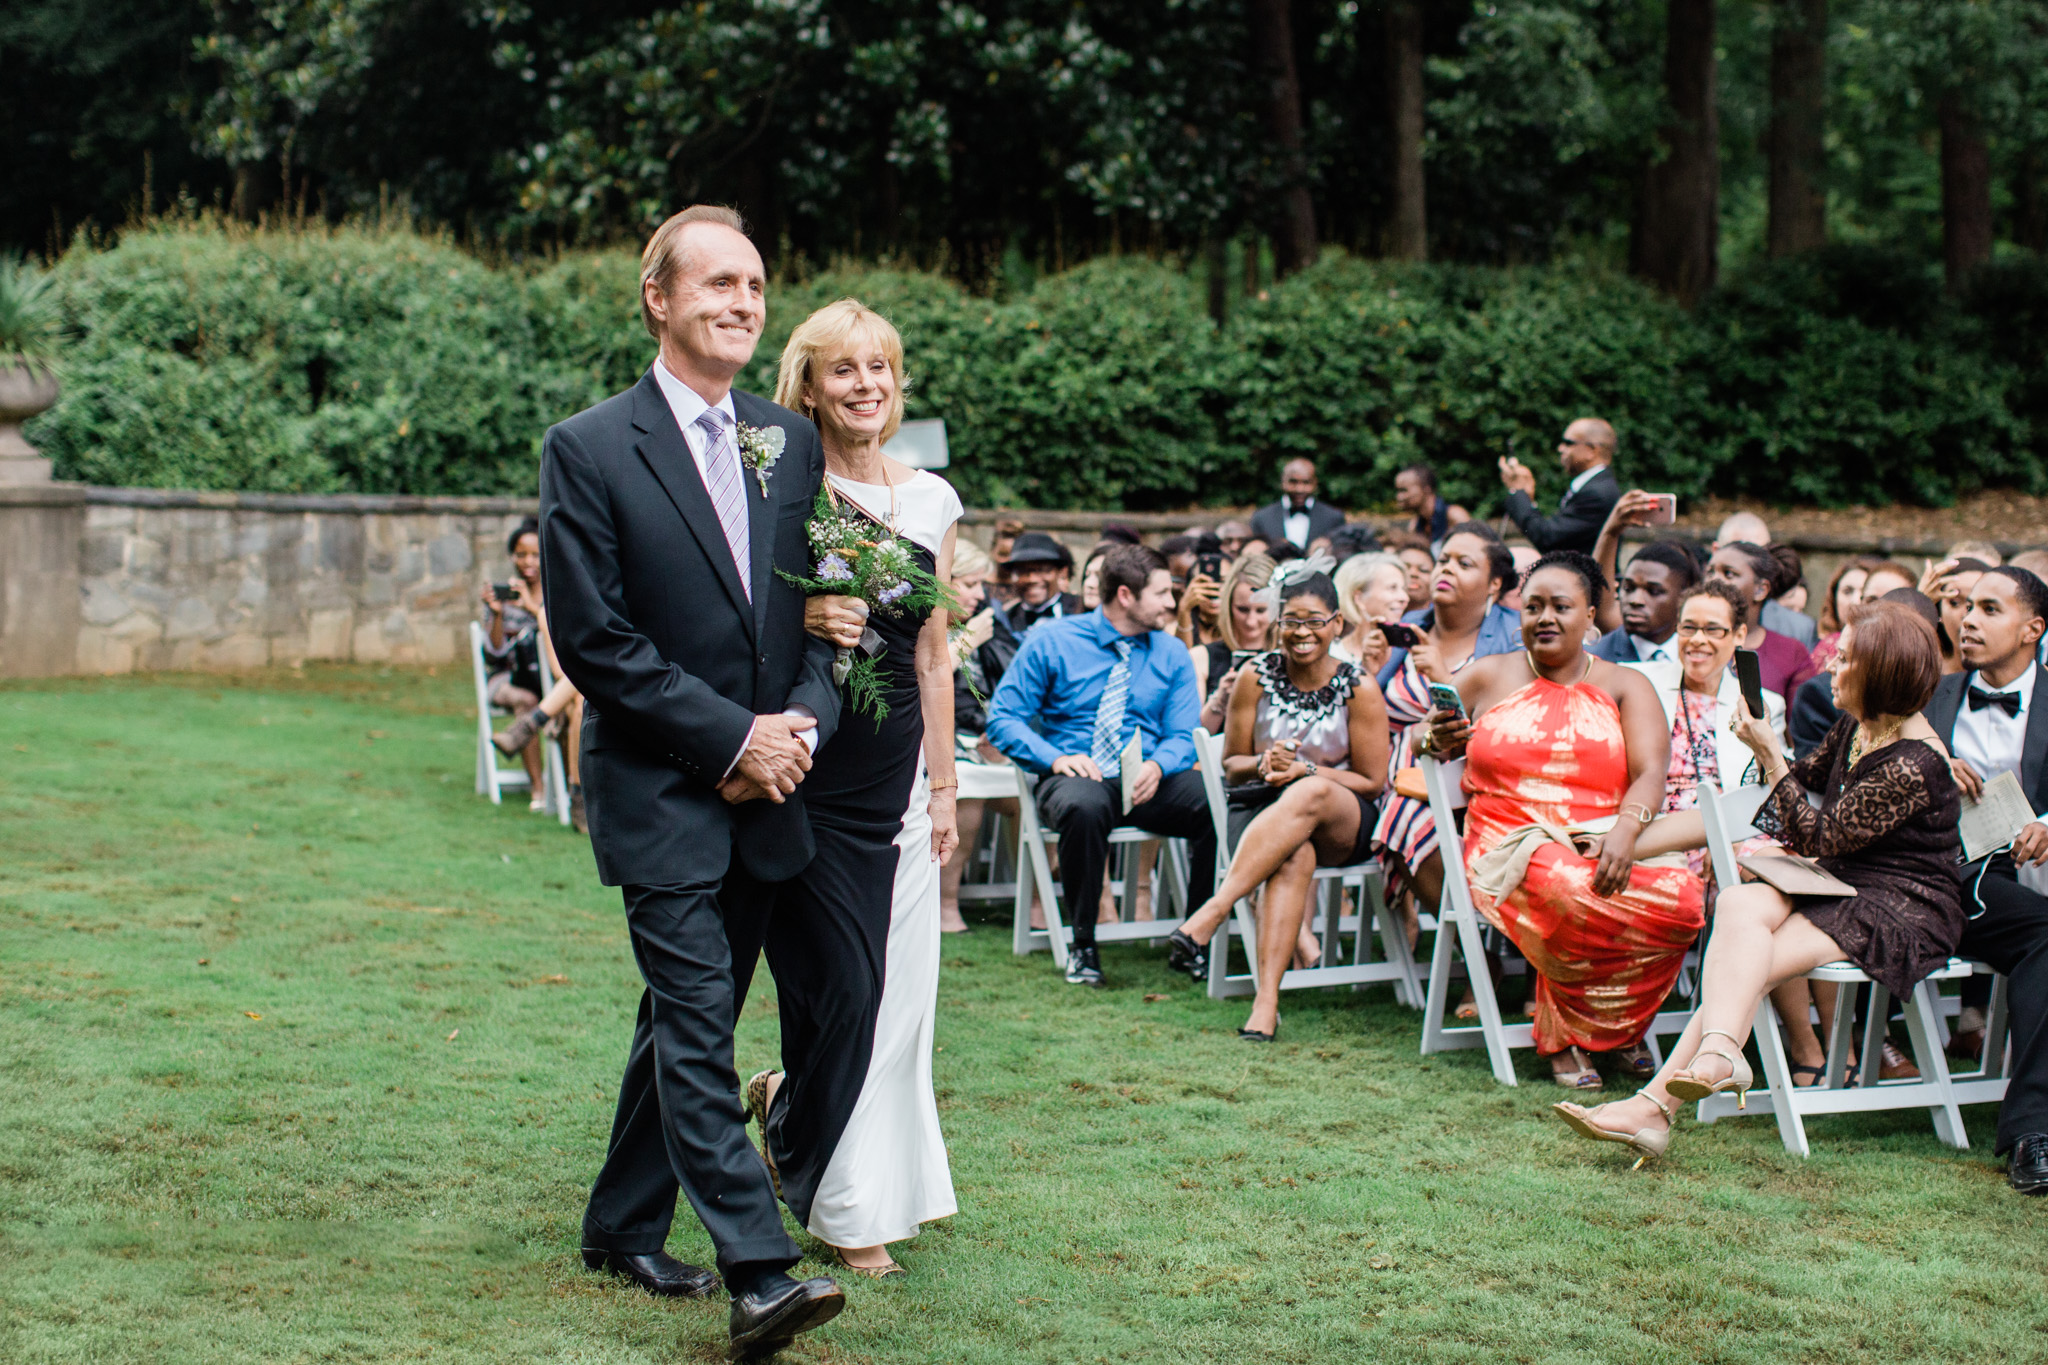 Parents of the groom start wedding processional. Photo by Rebecca Cerasani Weddings.